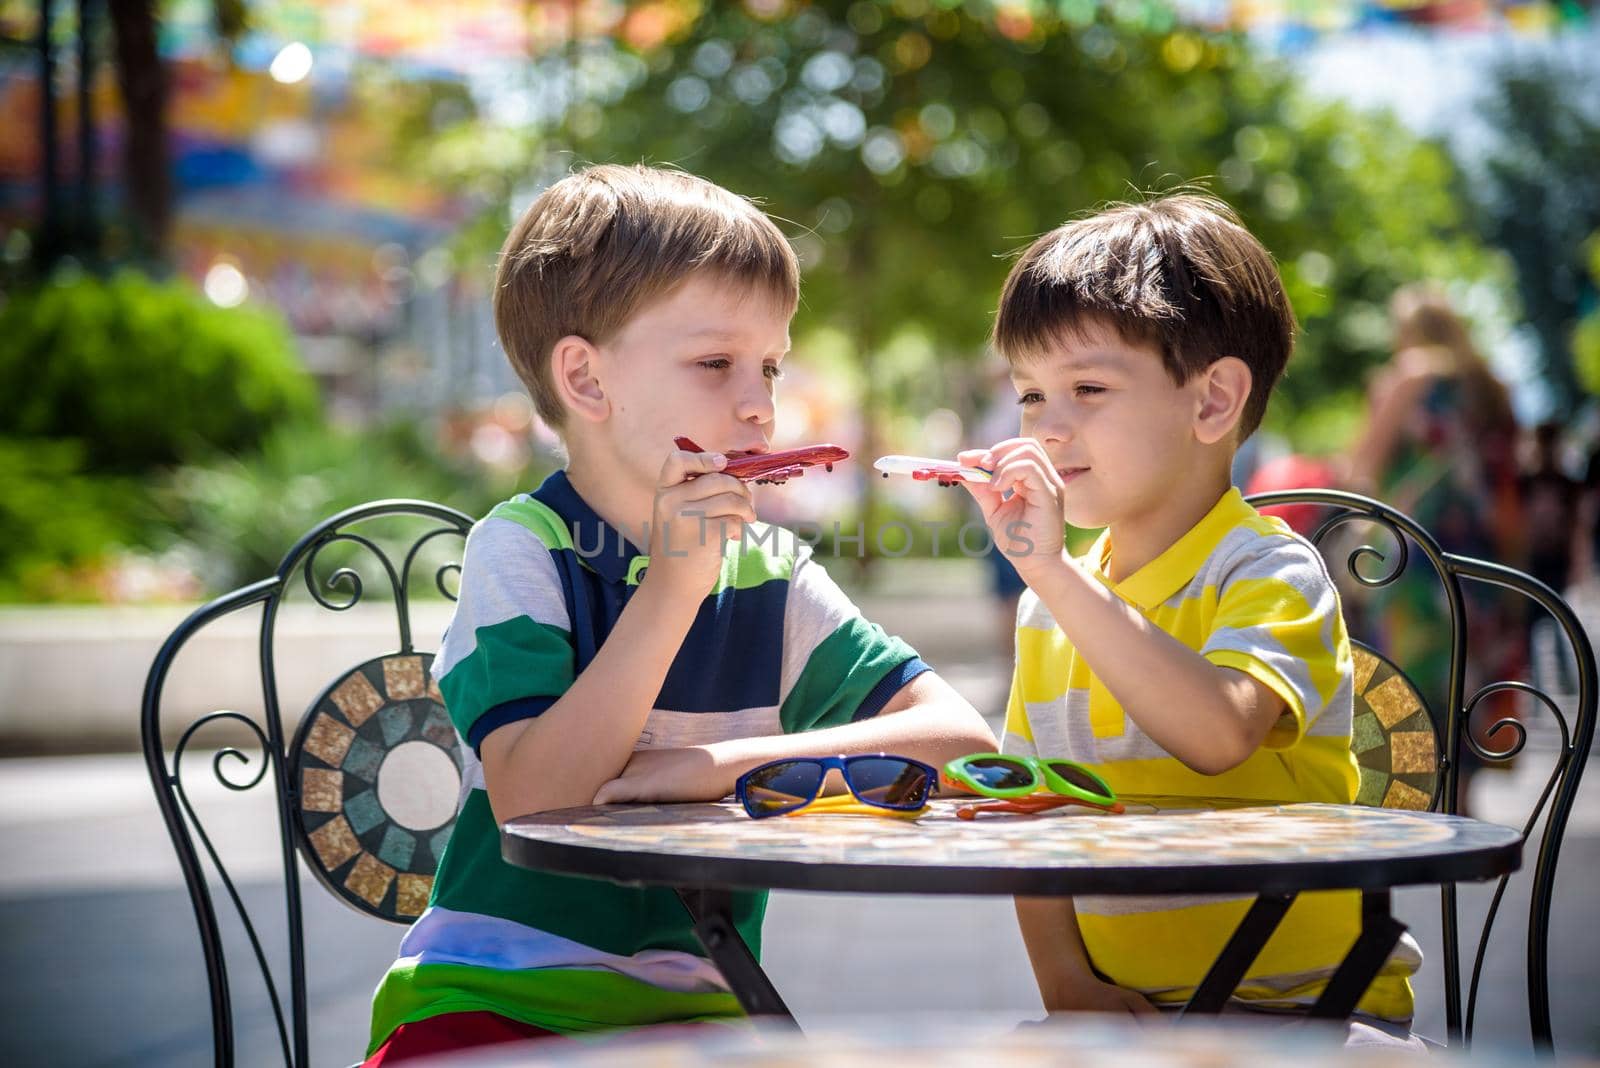 Two little kid boys waiting on table for healthy breakfast in hotel restaurant or city cafe. Child sit on comfortable chair play with toy aircraft, relaxed, enjoy their vacation. Summer holiday with children concept.